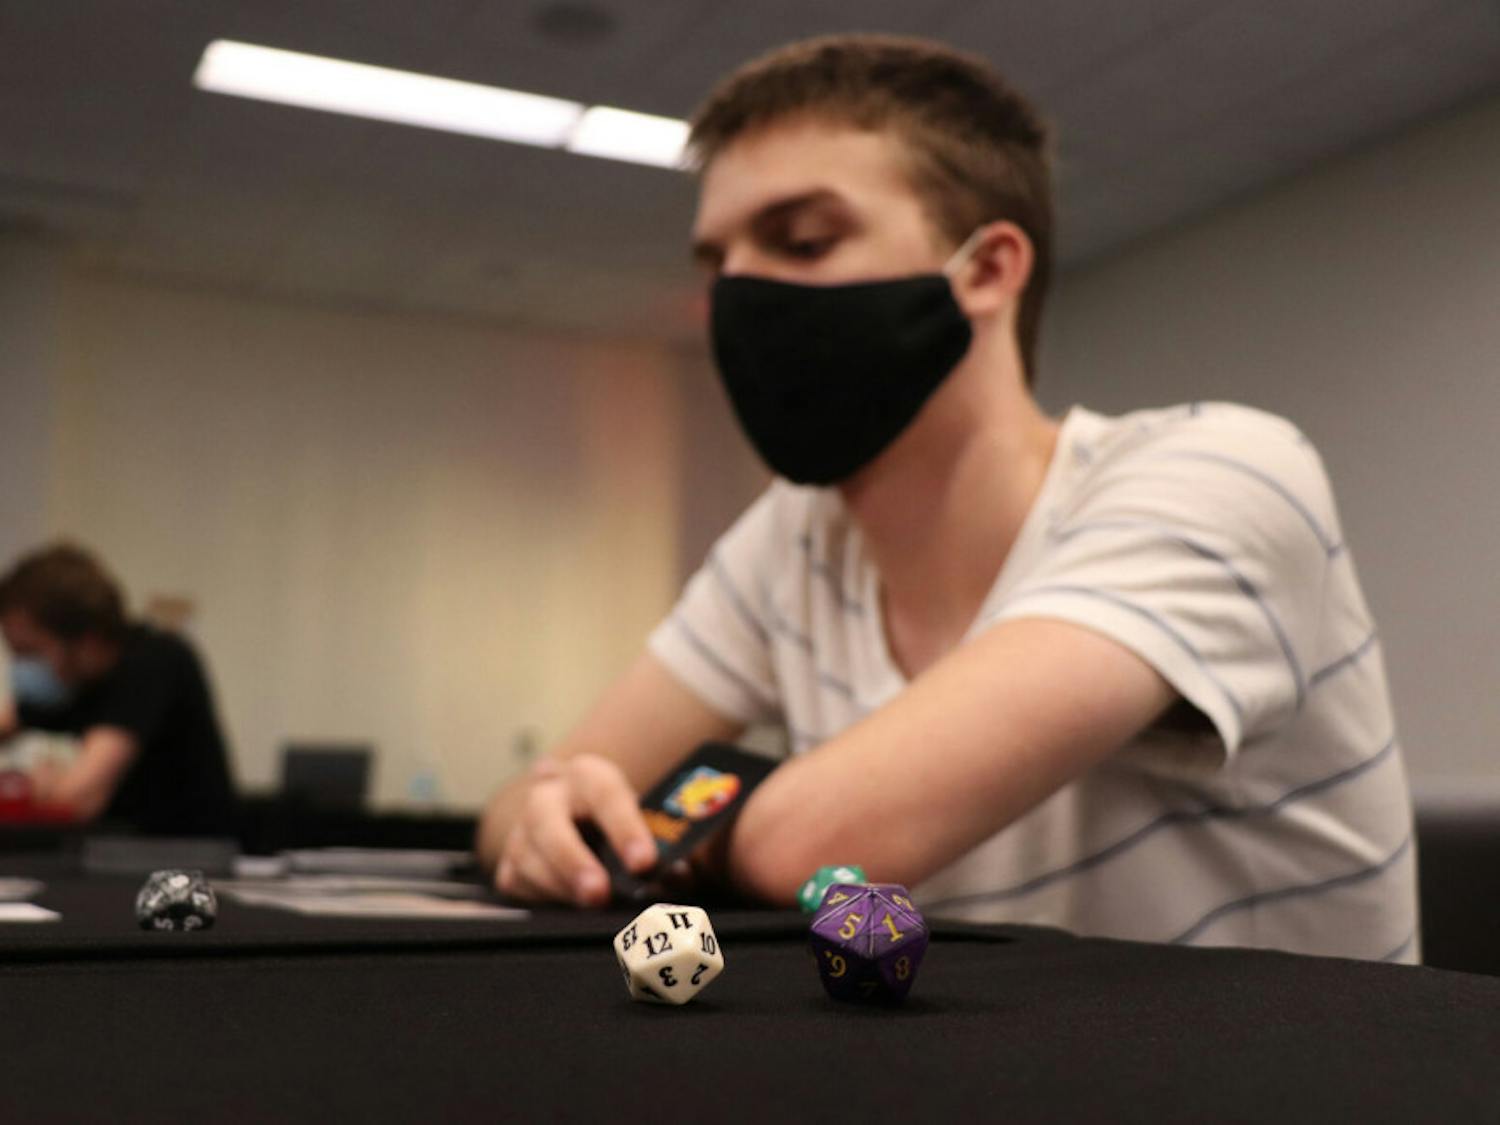 Ryan Feldbush, 19, a UF computer science sophomore, is seen playing ‘Magic: The Gathering’ at the Reitz Student Union on Wednesday, Sept. 30, 2020. Feldbush said he’s played the game for six years now.&nbsp;